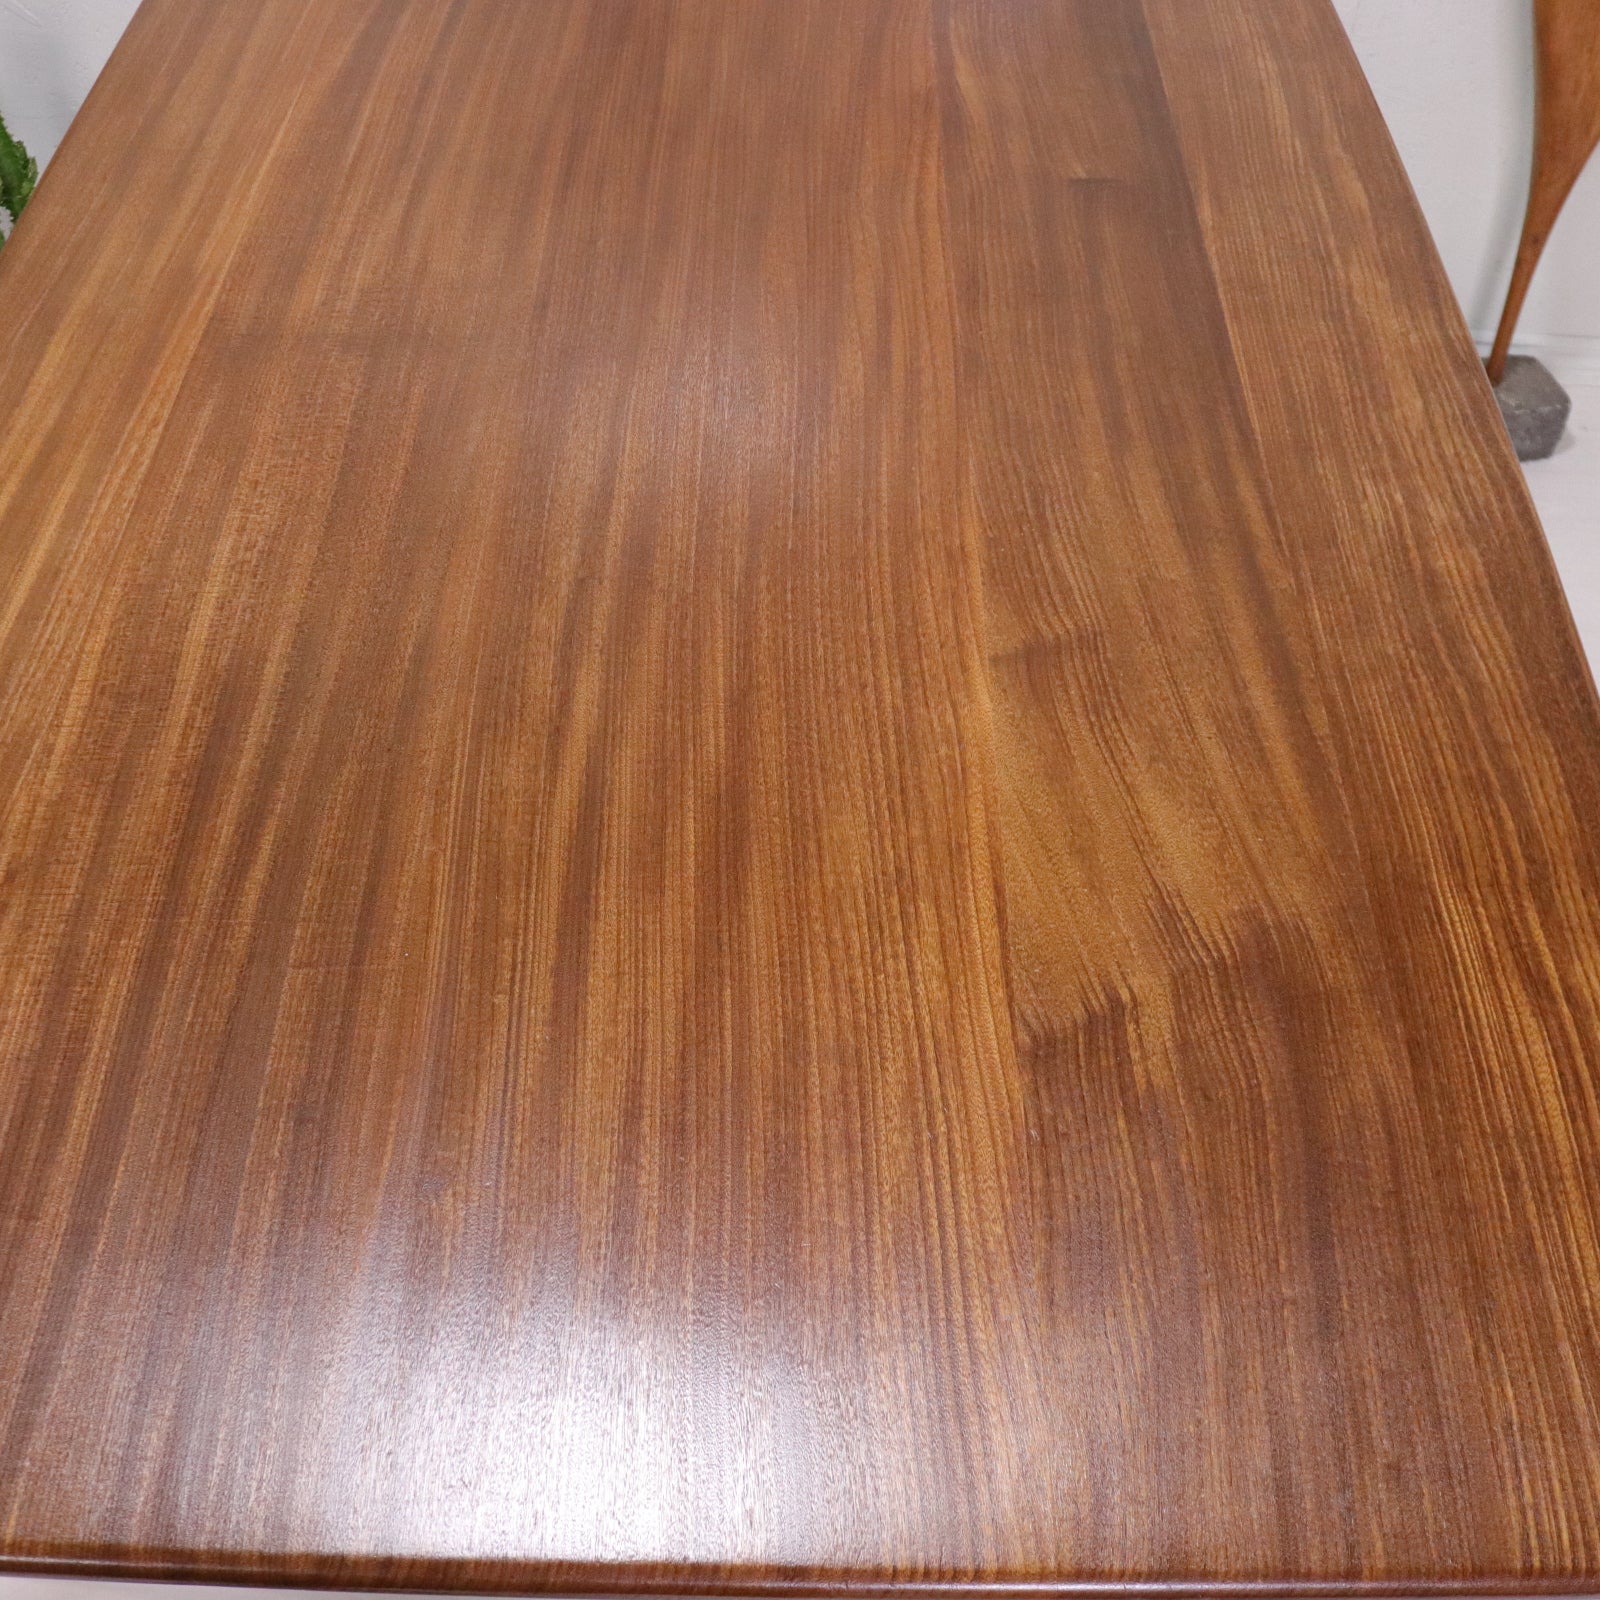 Mid Century Dining Table by A. Younger Solid Plank Dining Table - teakyfinders